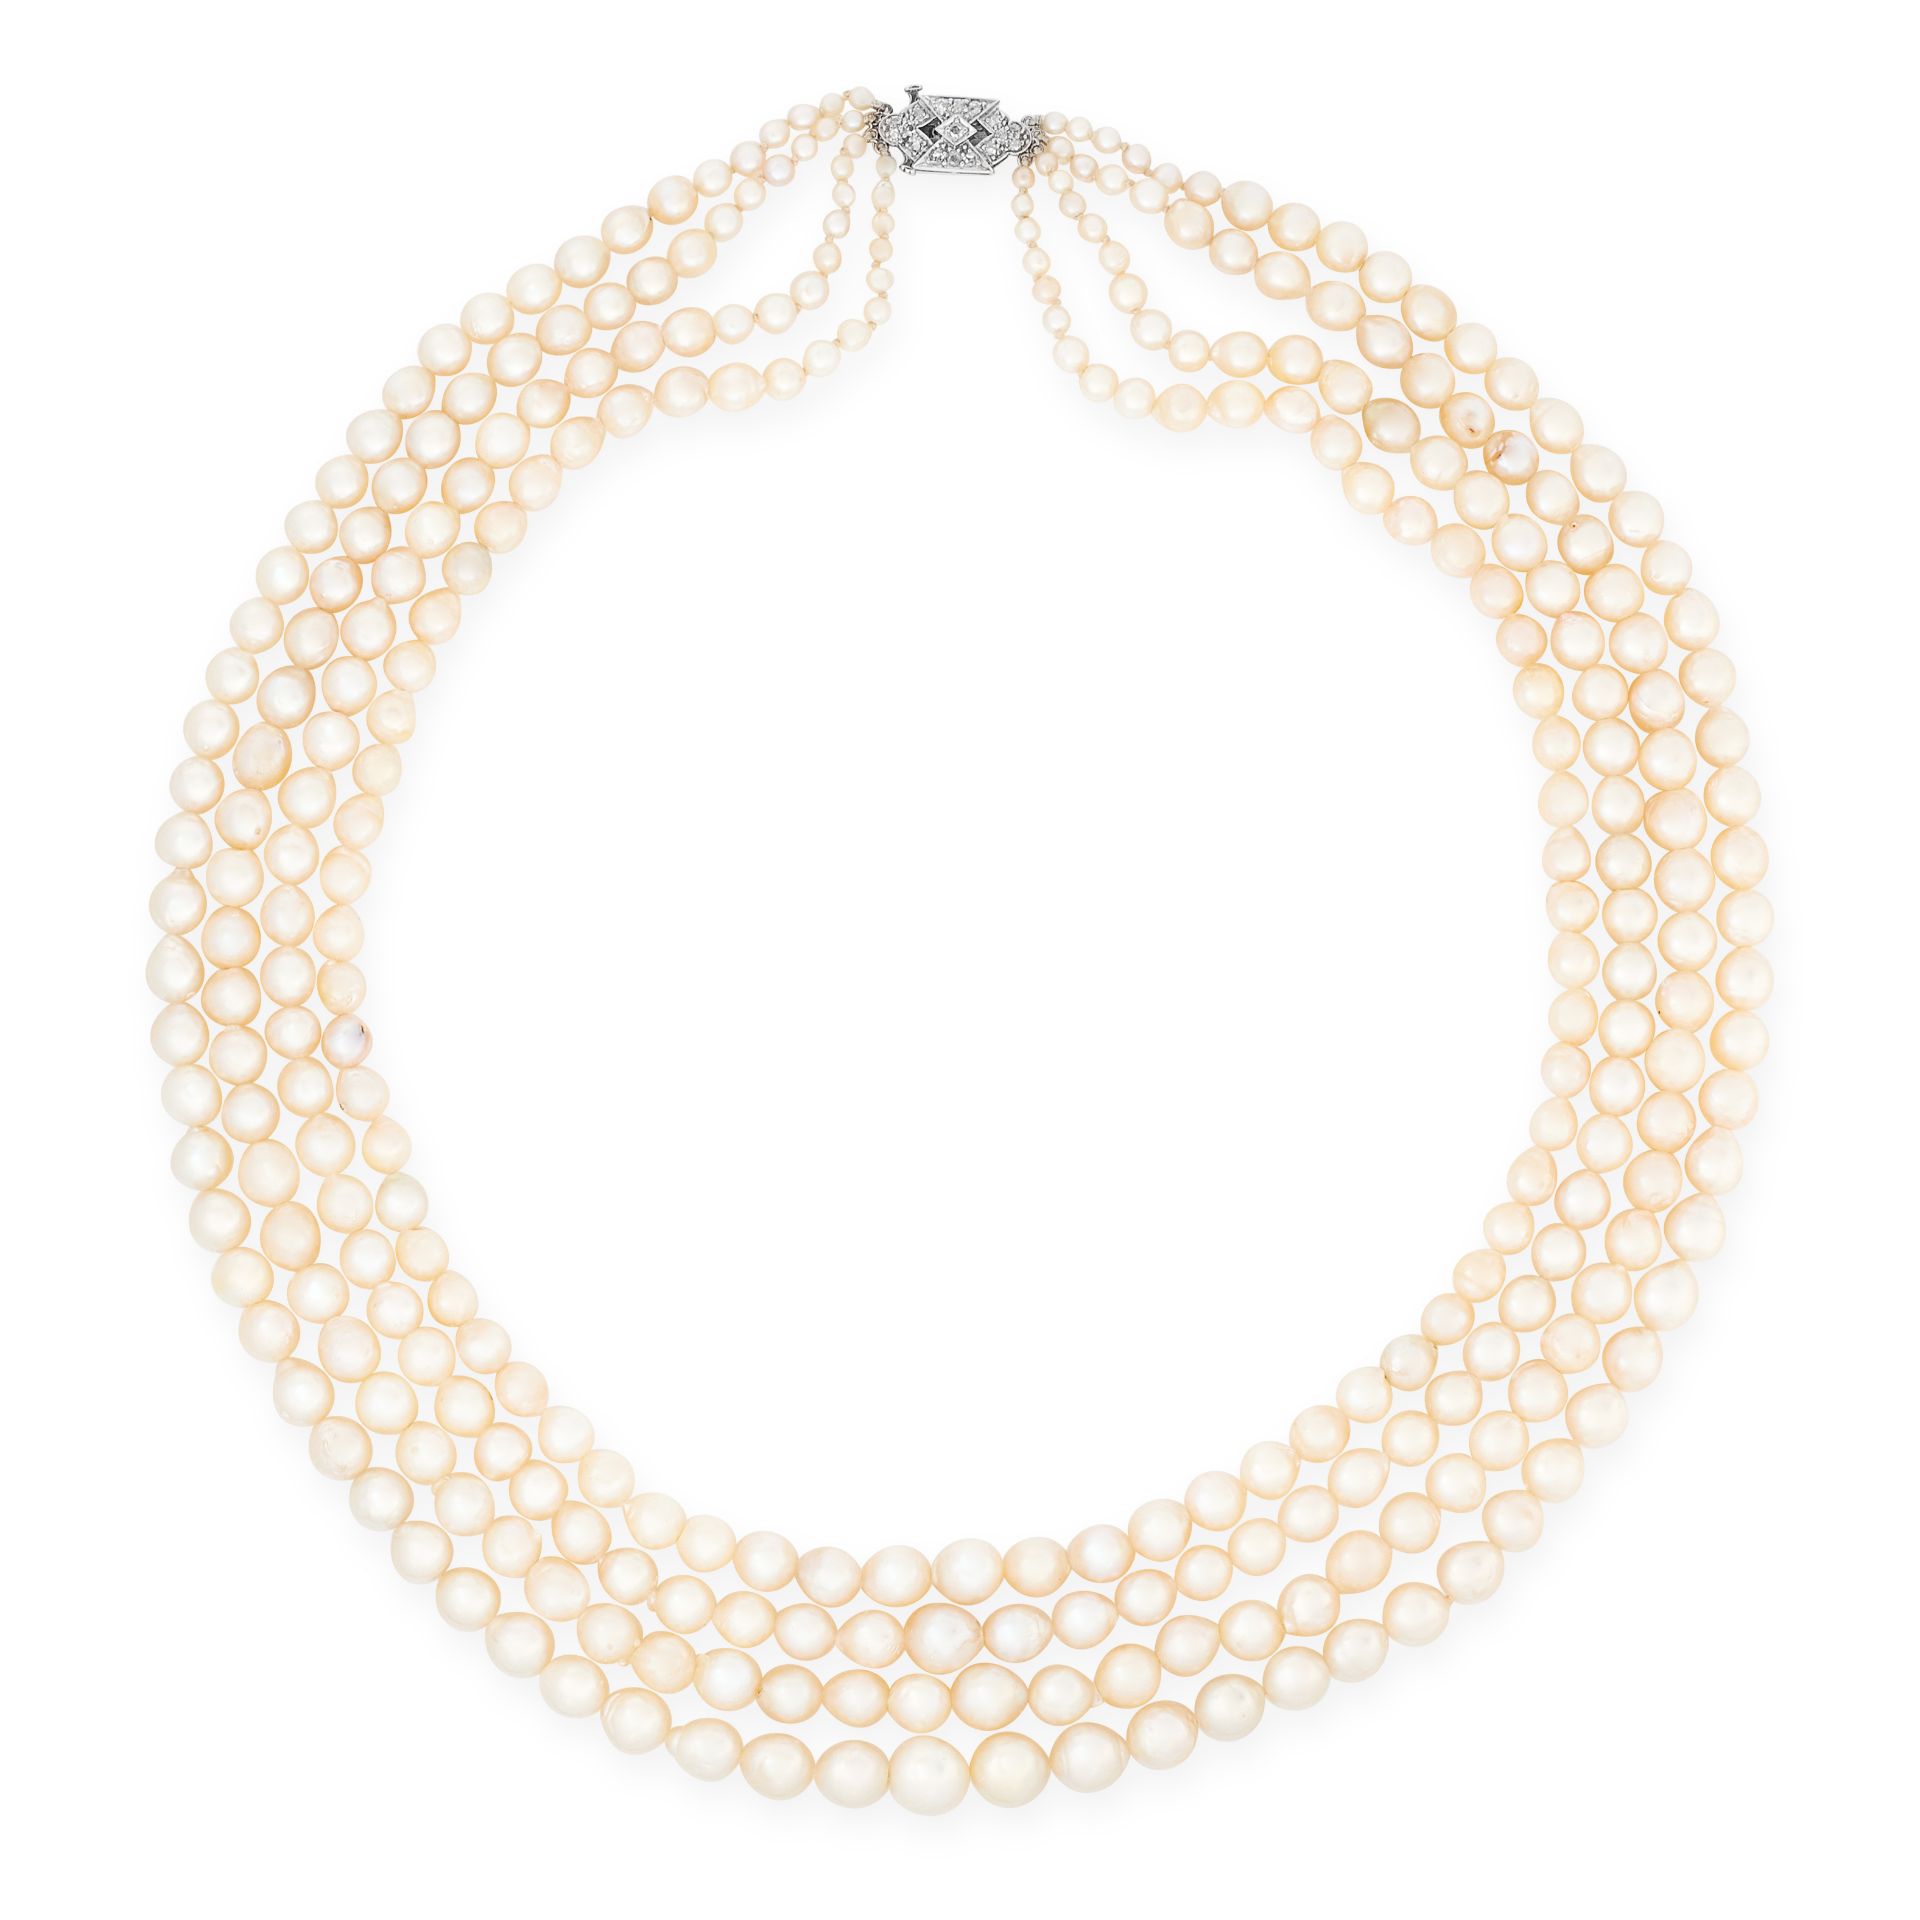 A PEARL AND DIAMOND NECKLACE comprising of four row of pearls ranging from 2.9mm - 9.8mm in